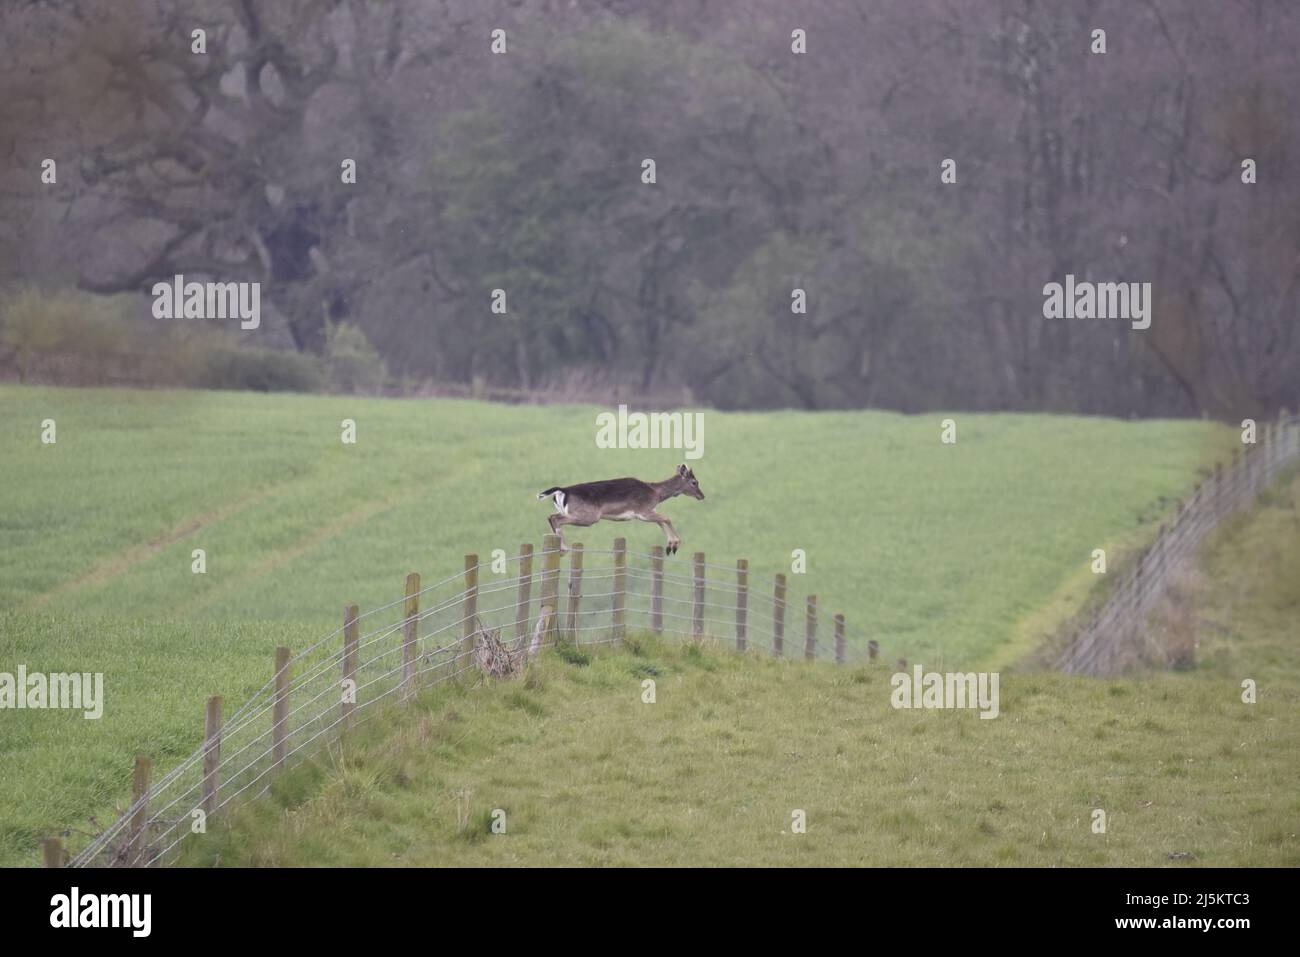 Female (Doe) European Fallow Deer Leaping Over a Fence, Left to Right, on Staffordshire, UK, Farmland in Spring Stock Photo